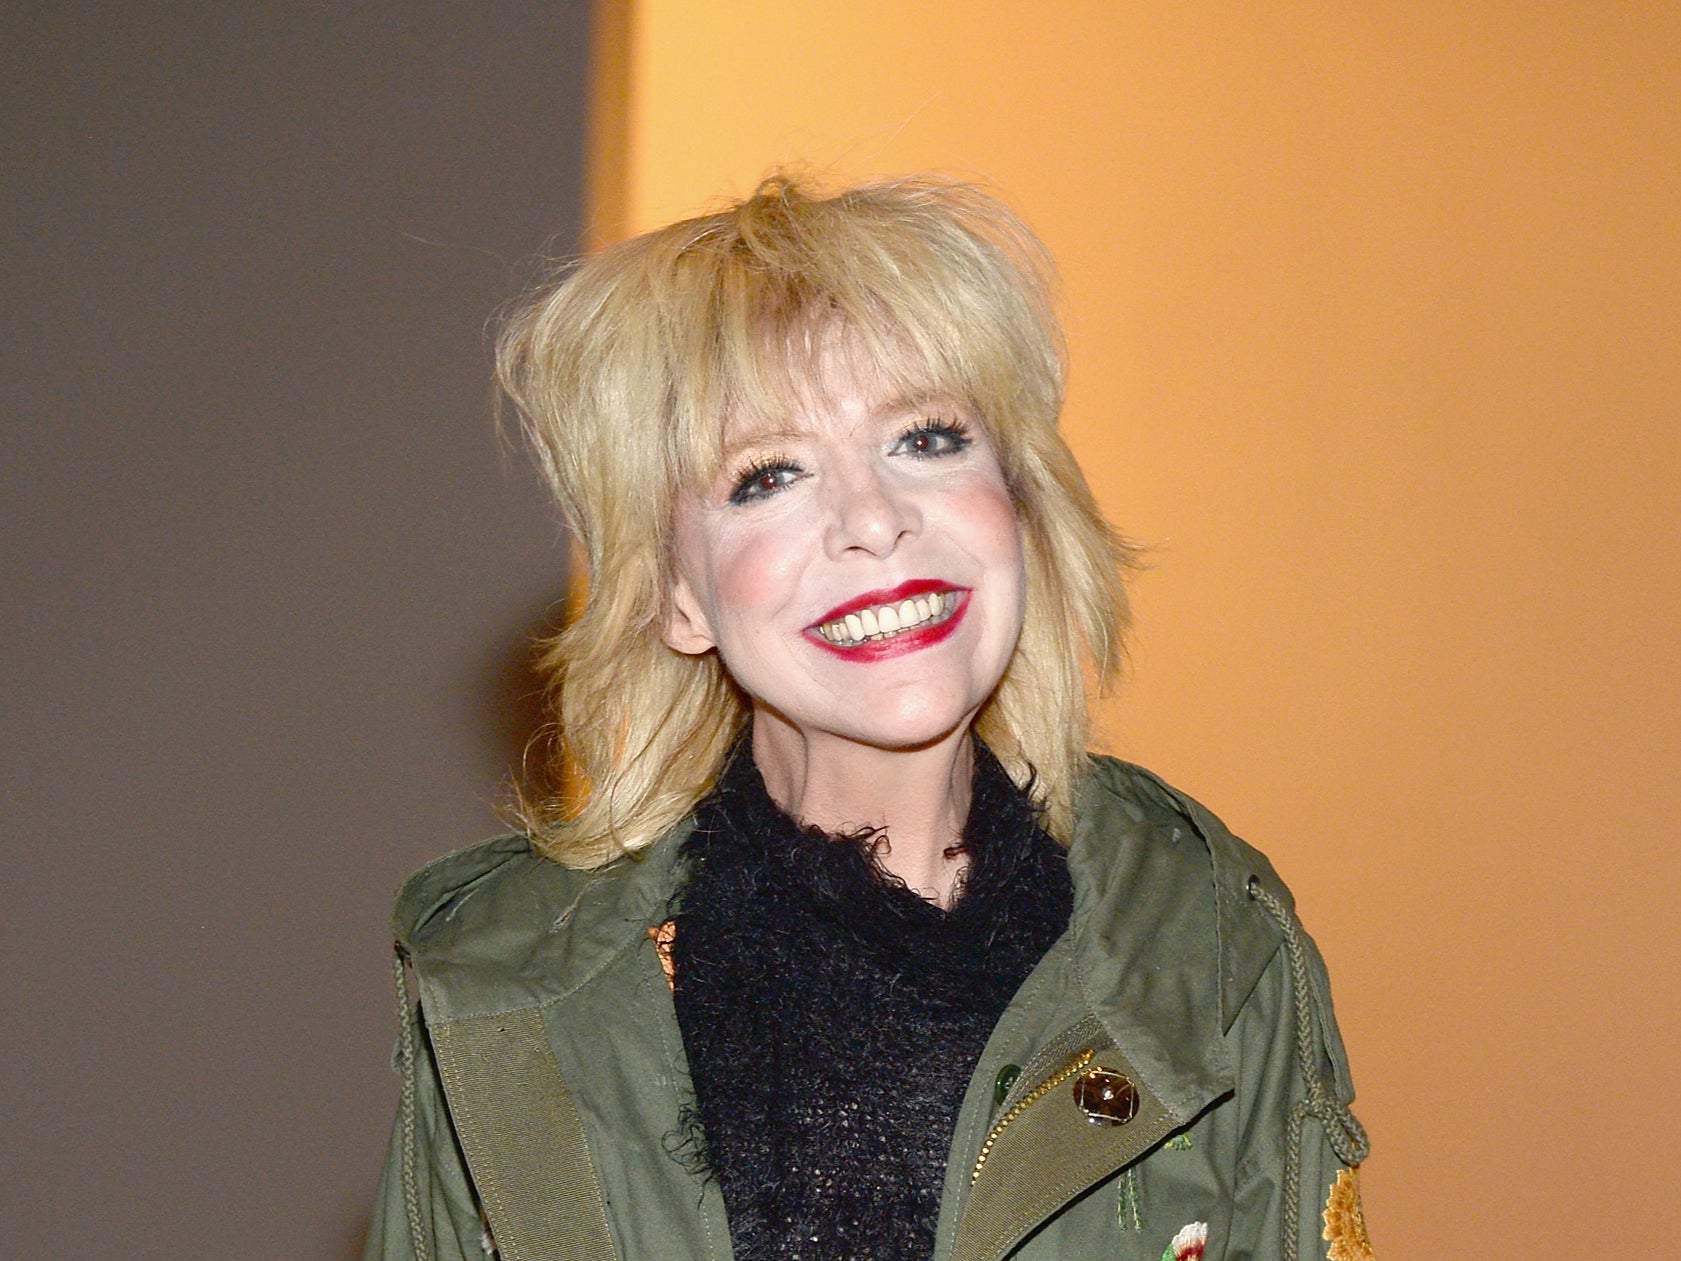 Julee Cruise attends New York Fashion in 2017